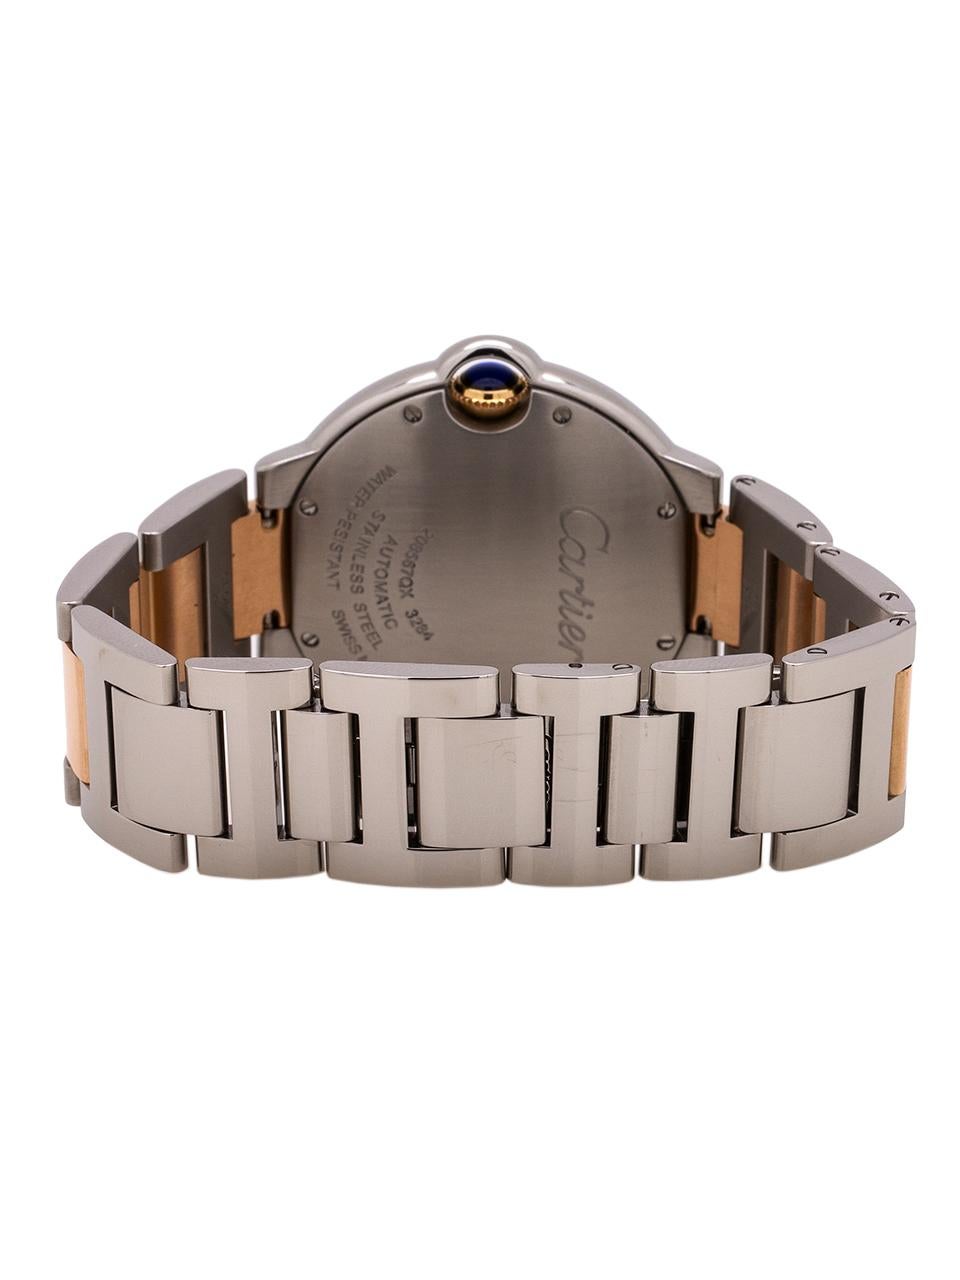 Women's or Men's Cartier Ballon Bleu Stainless and Pink Gold Mother of Pearl, circa 2000s